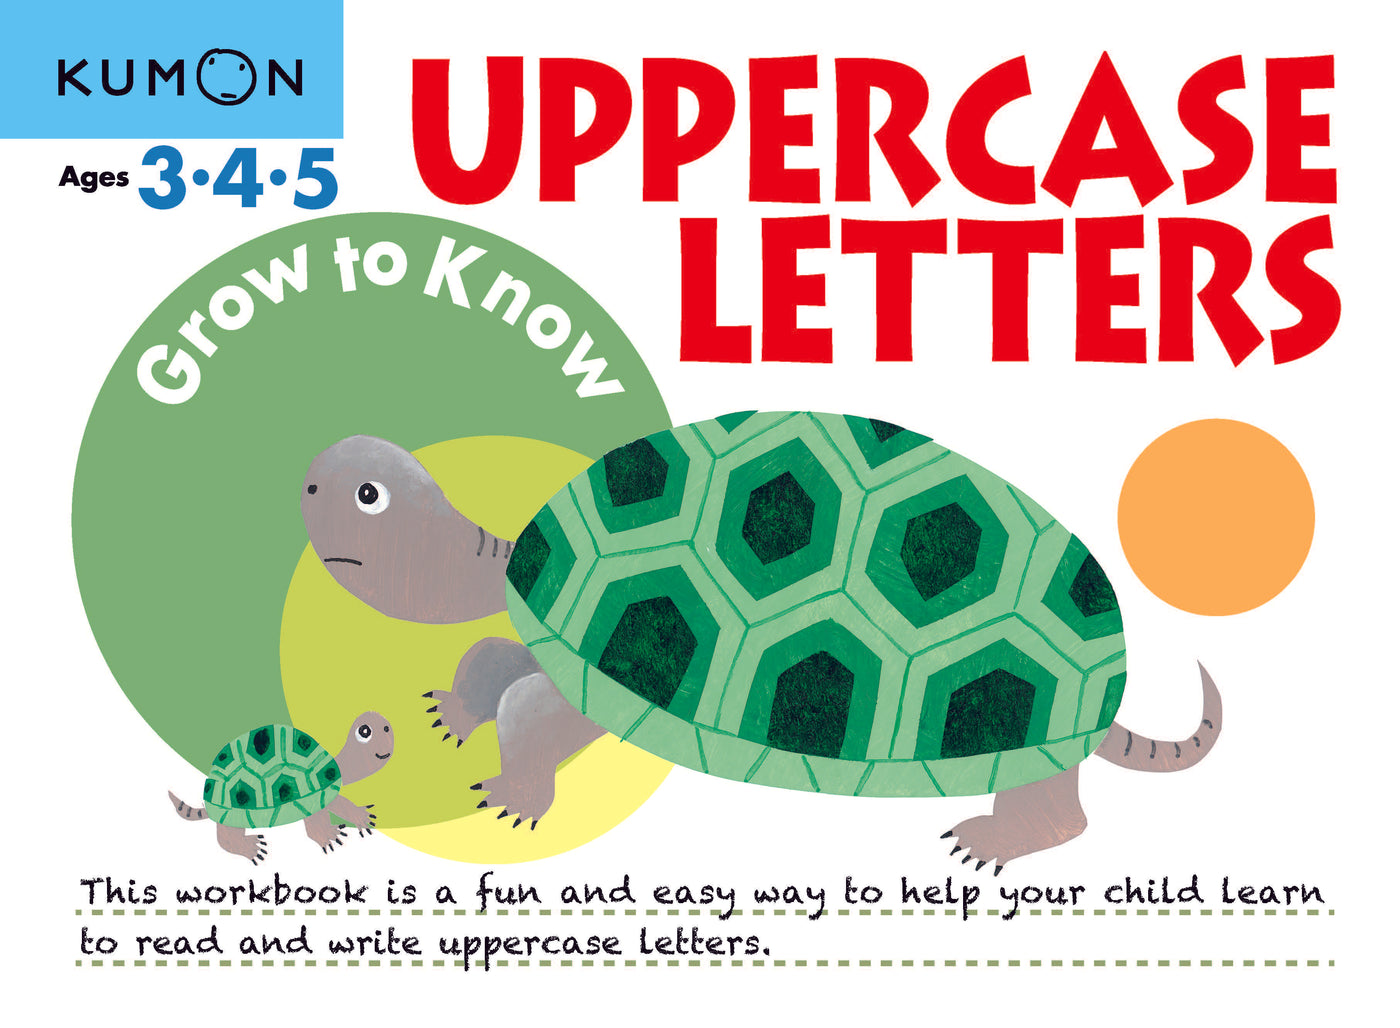 Grow to Know: Uppercase Letters